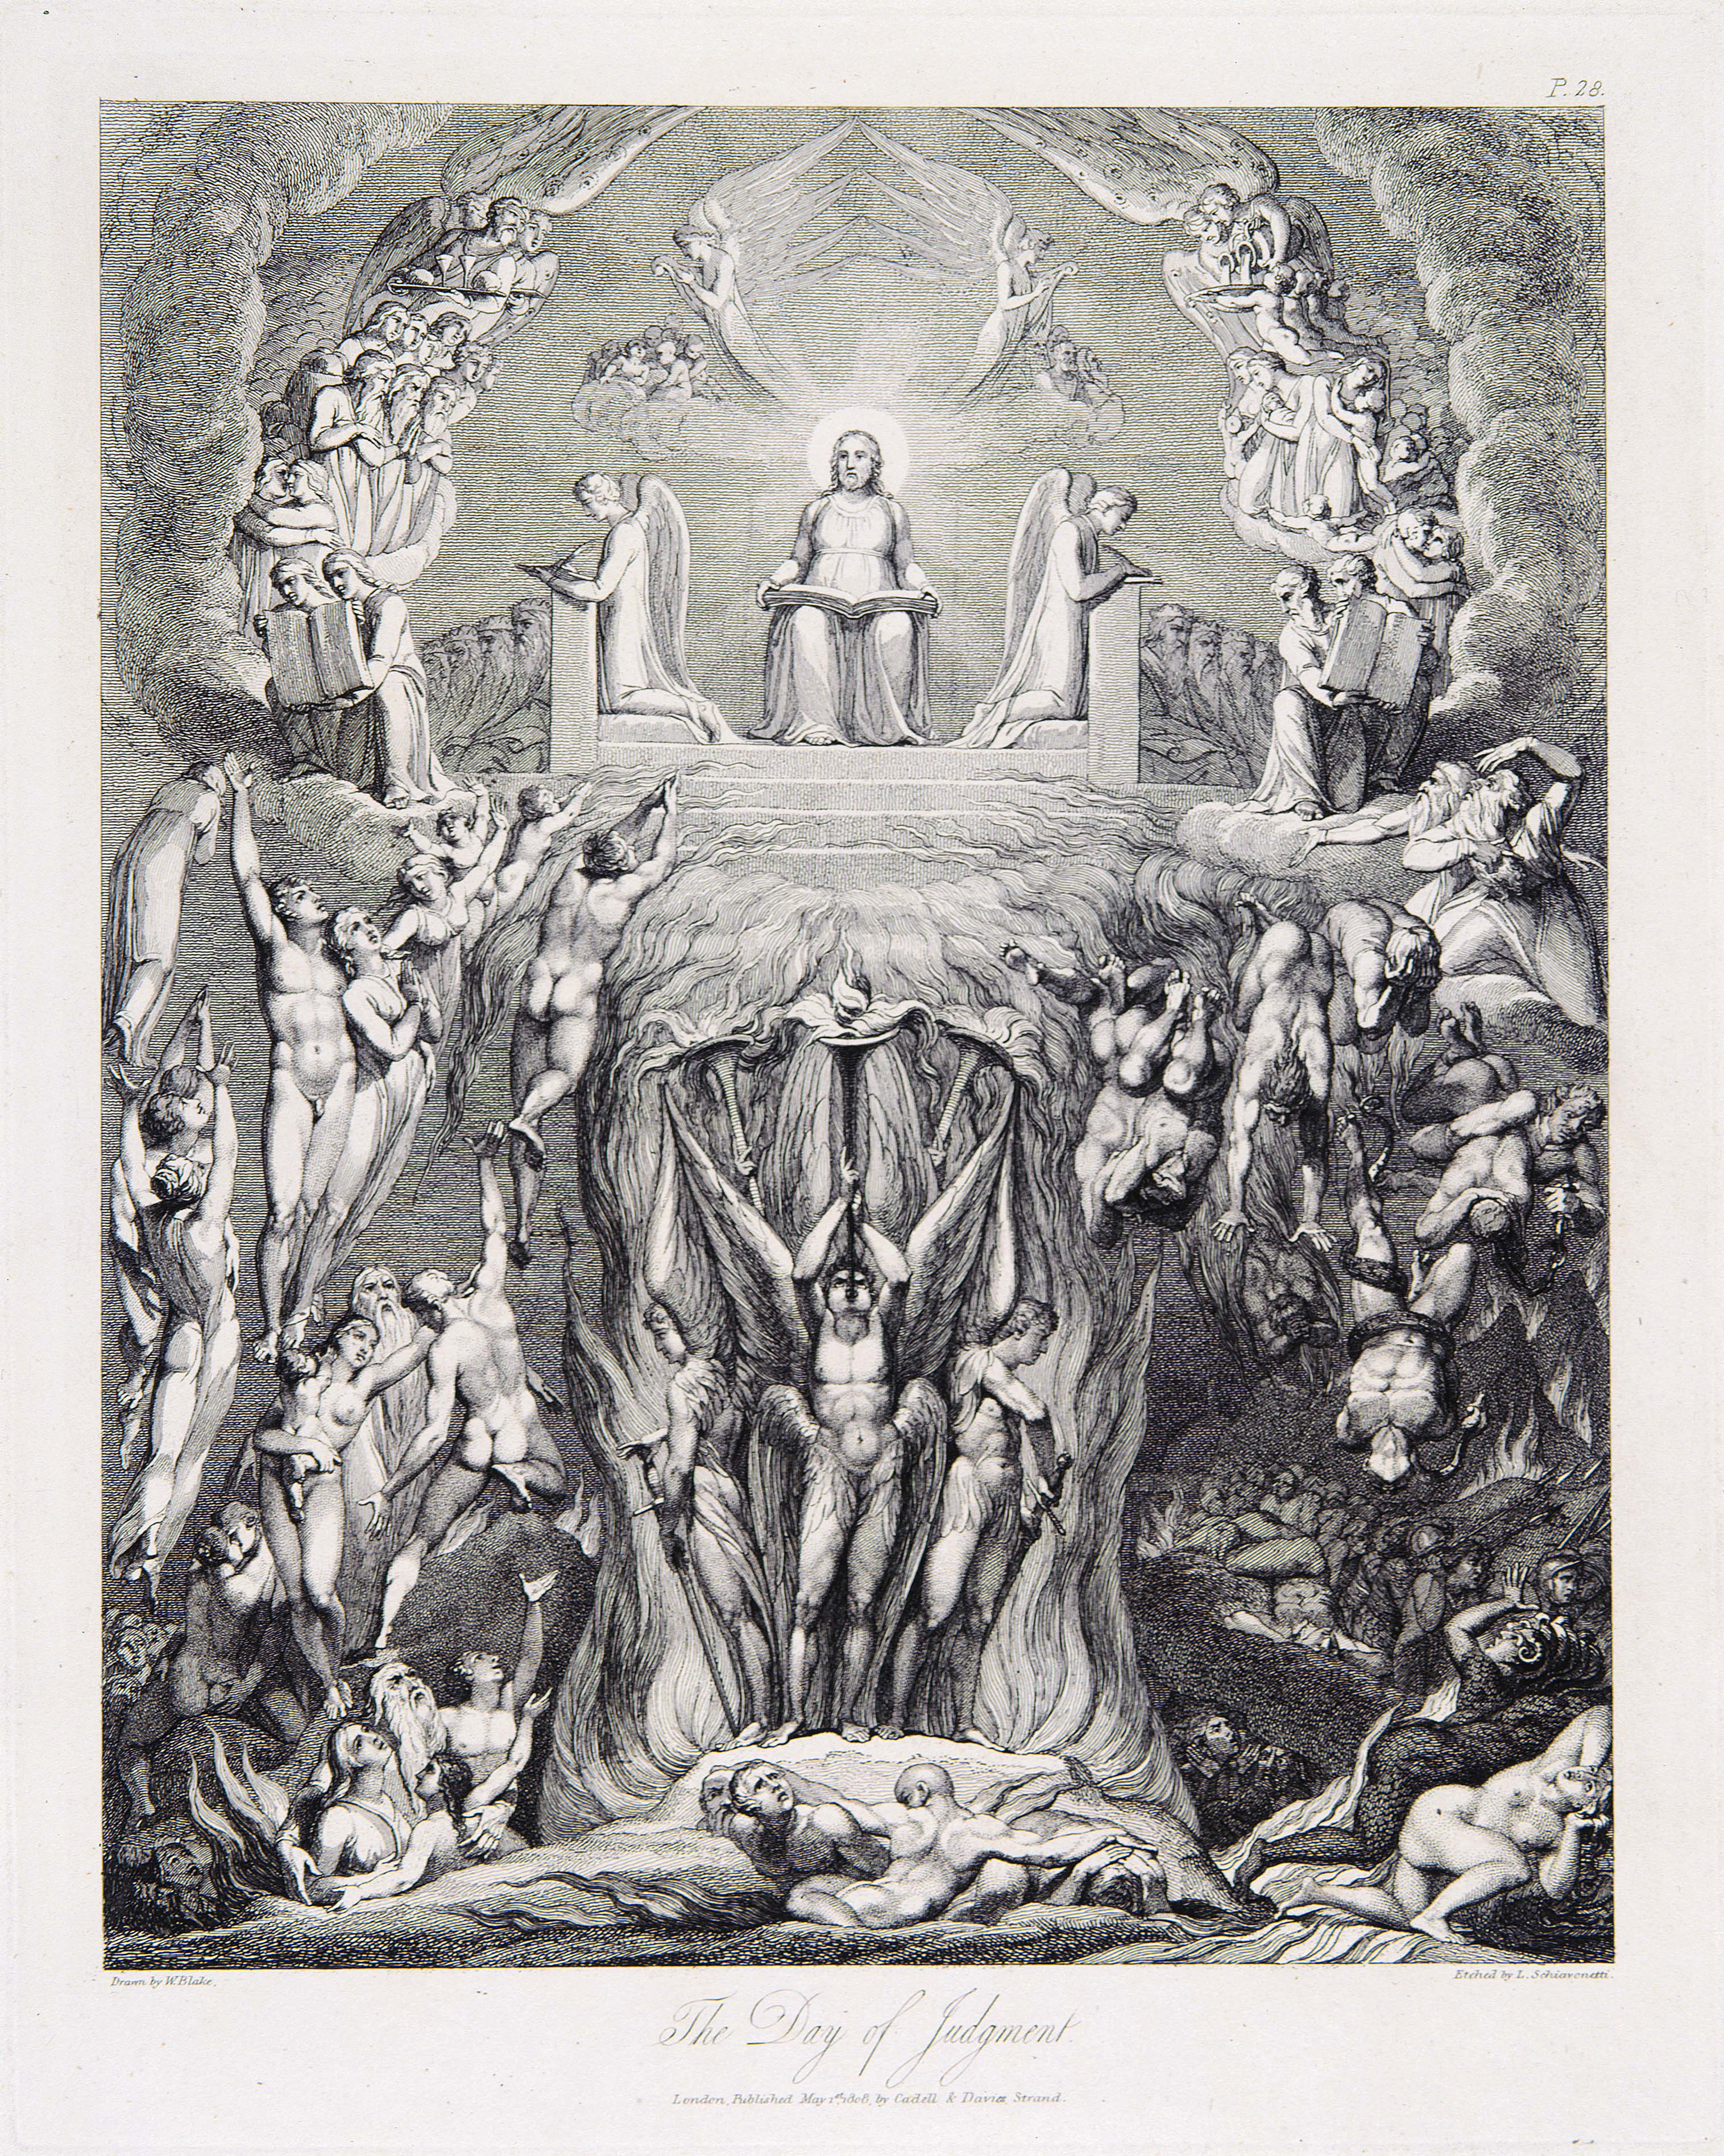 P.28.
			Drawn by W. Blake.
			Etched by L. Schiavonetti.
			The Day of Judgment.
			London, Published May 1st. 1808, by Cadell & Davies, Strand.